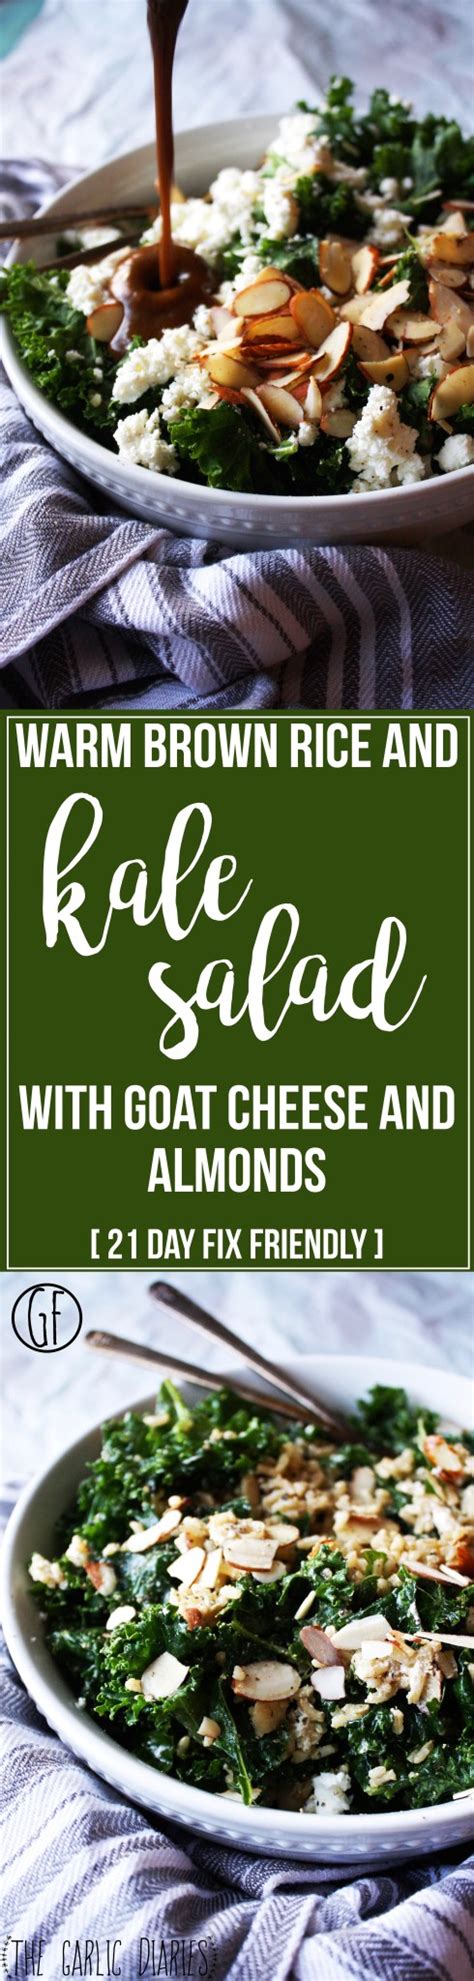 Contact suppliers, chat instantly, and compare sellers and products based. Warm Brown Rice and Kale Salad with Goat Cheese and Almonds